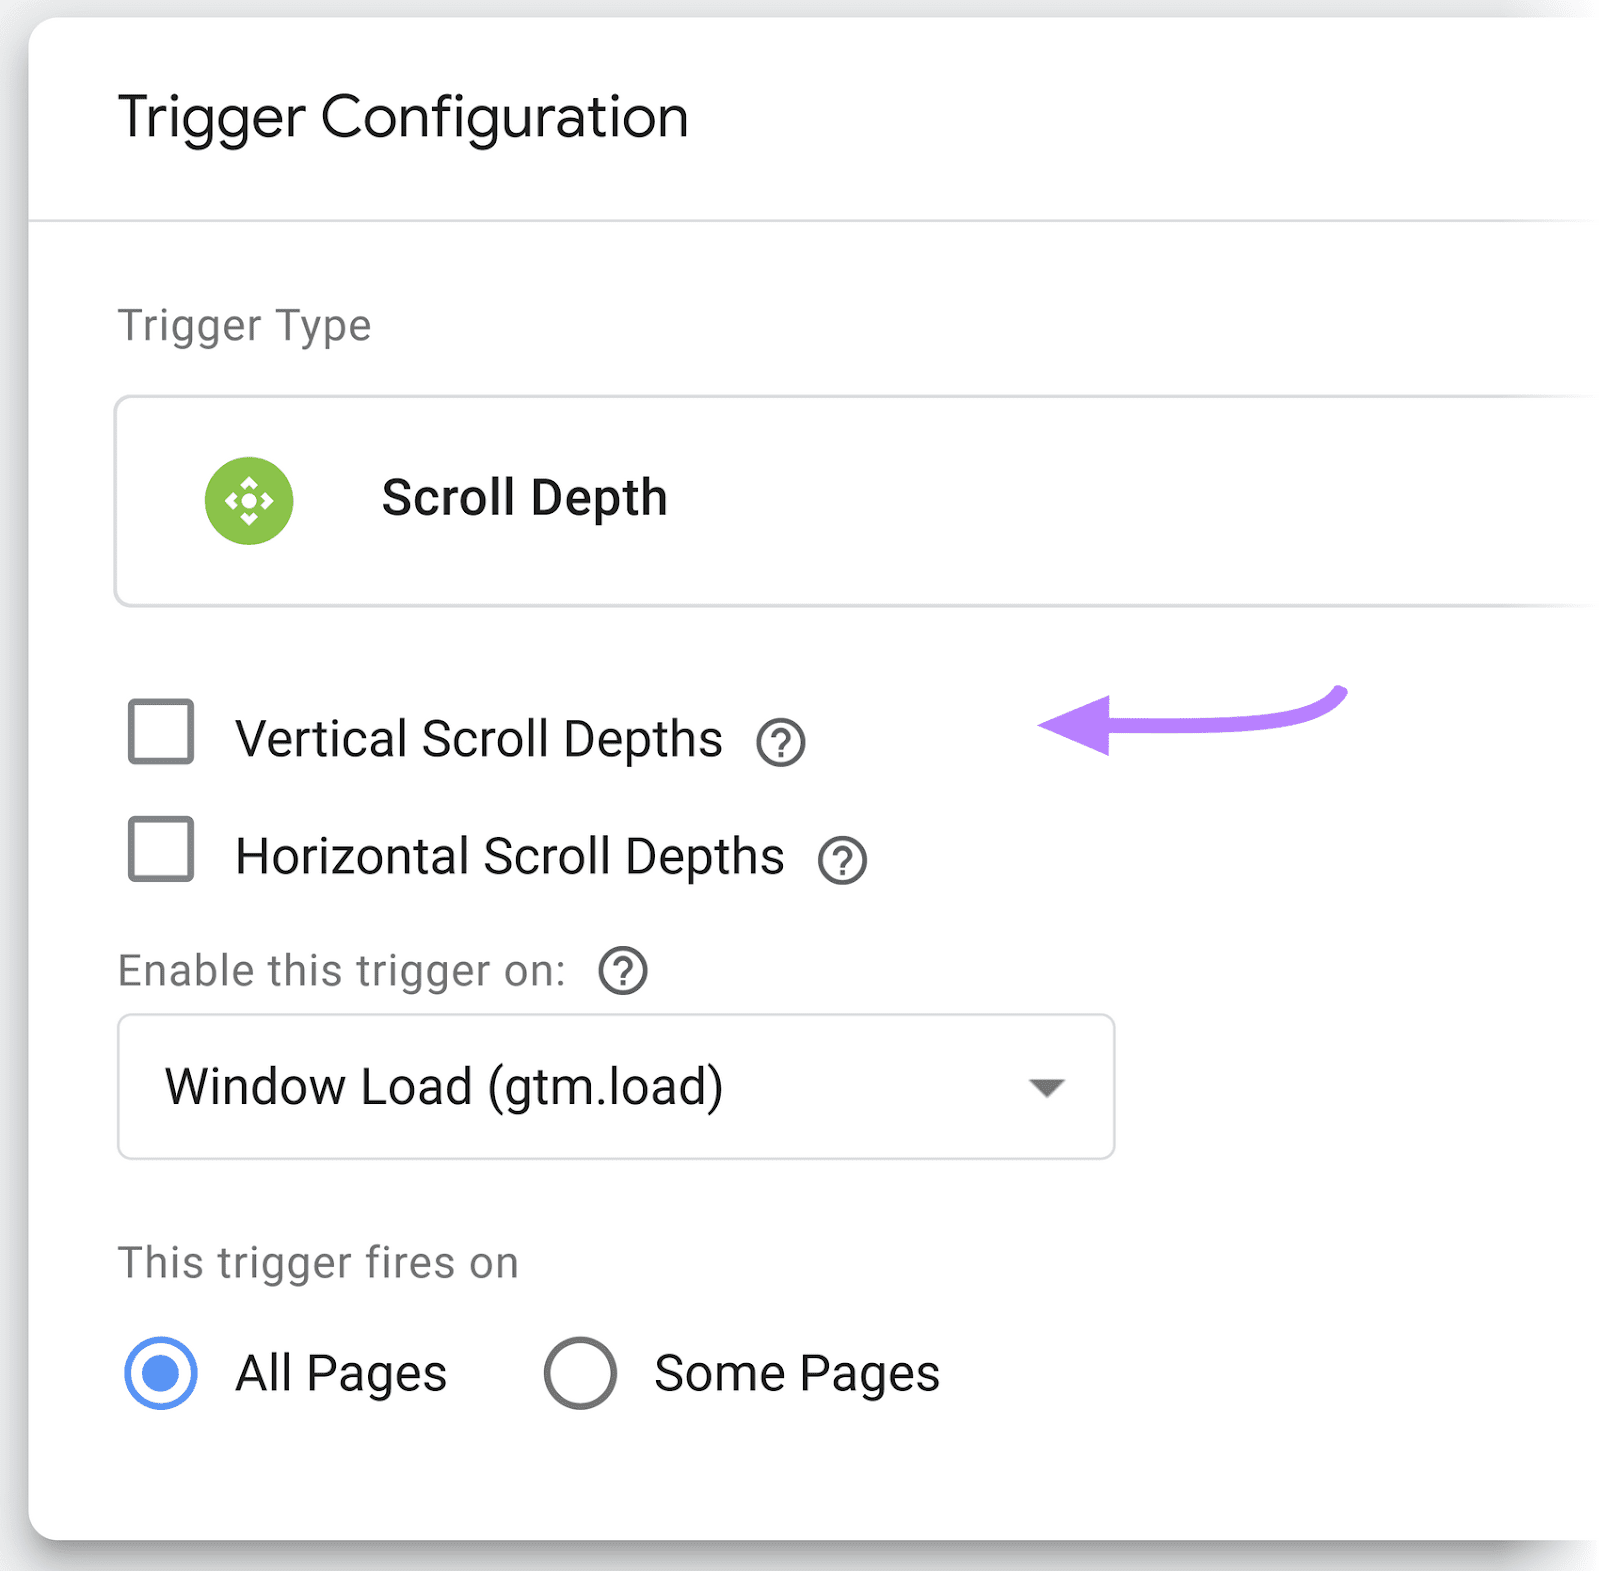 An arrow pointing to “Vertical Scroll Depths" checkbox under "Trigger Configuration" window